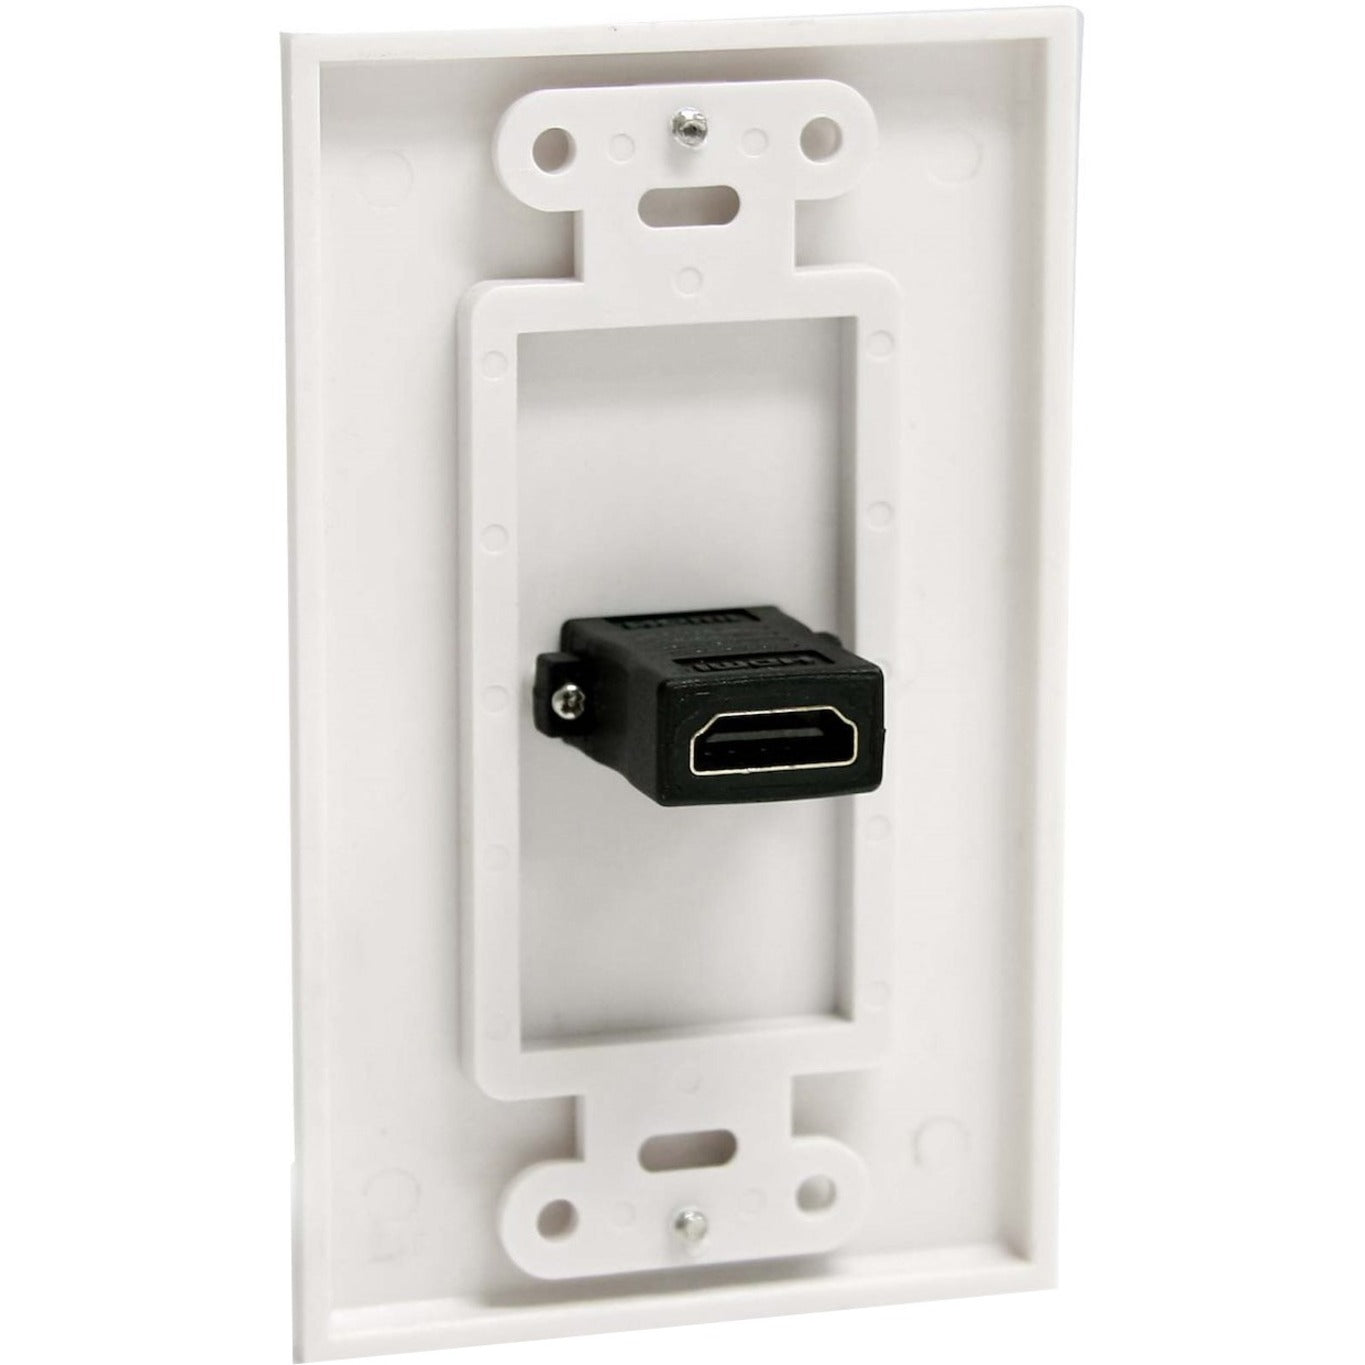 StarTech.com HDMIPLATE Single Outlet Female HDMI Wall Plate White, Easy Installation for Home Theater Setup